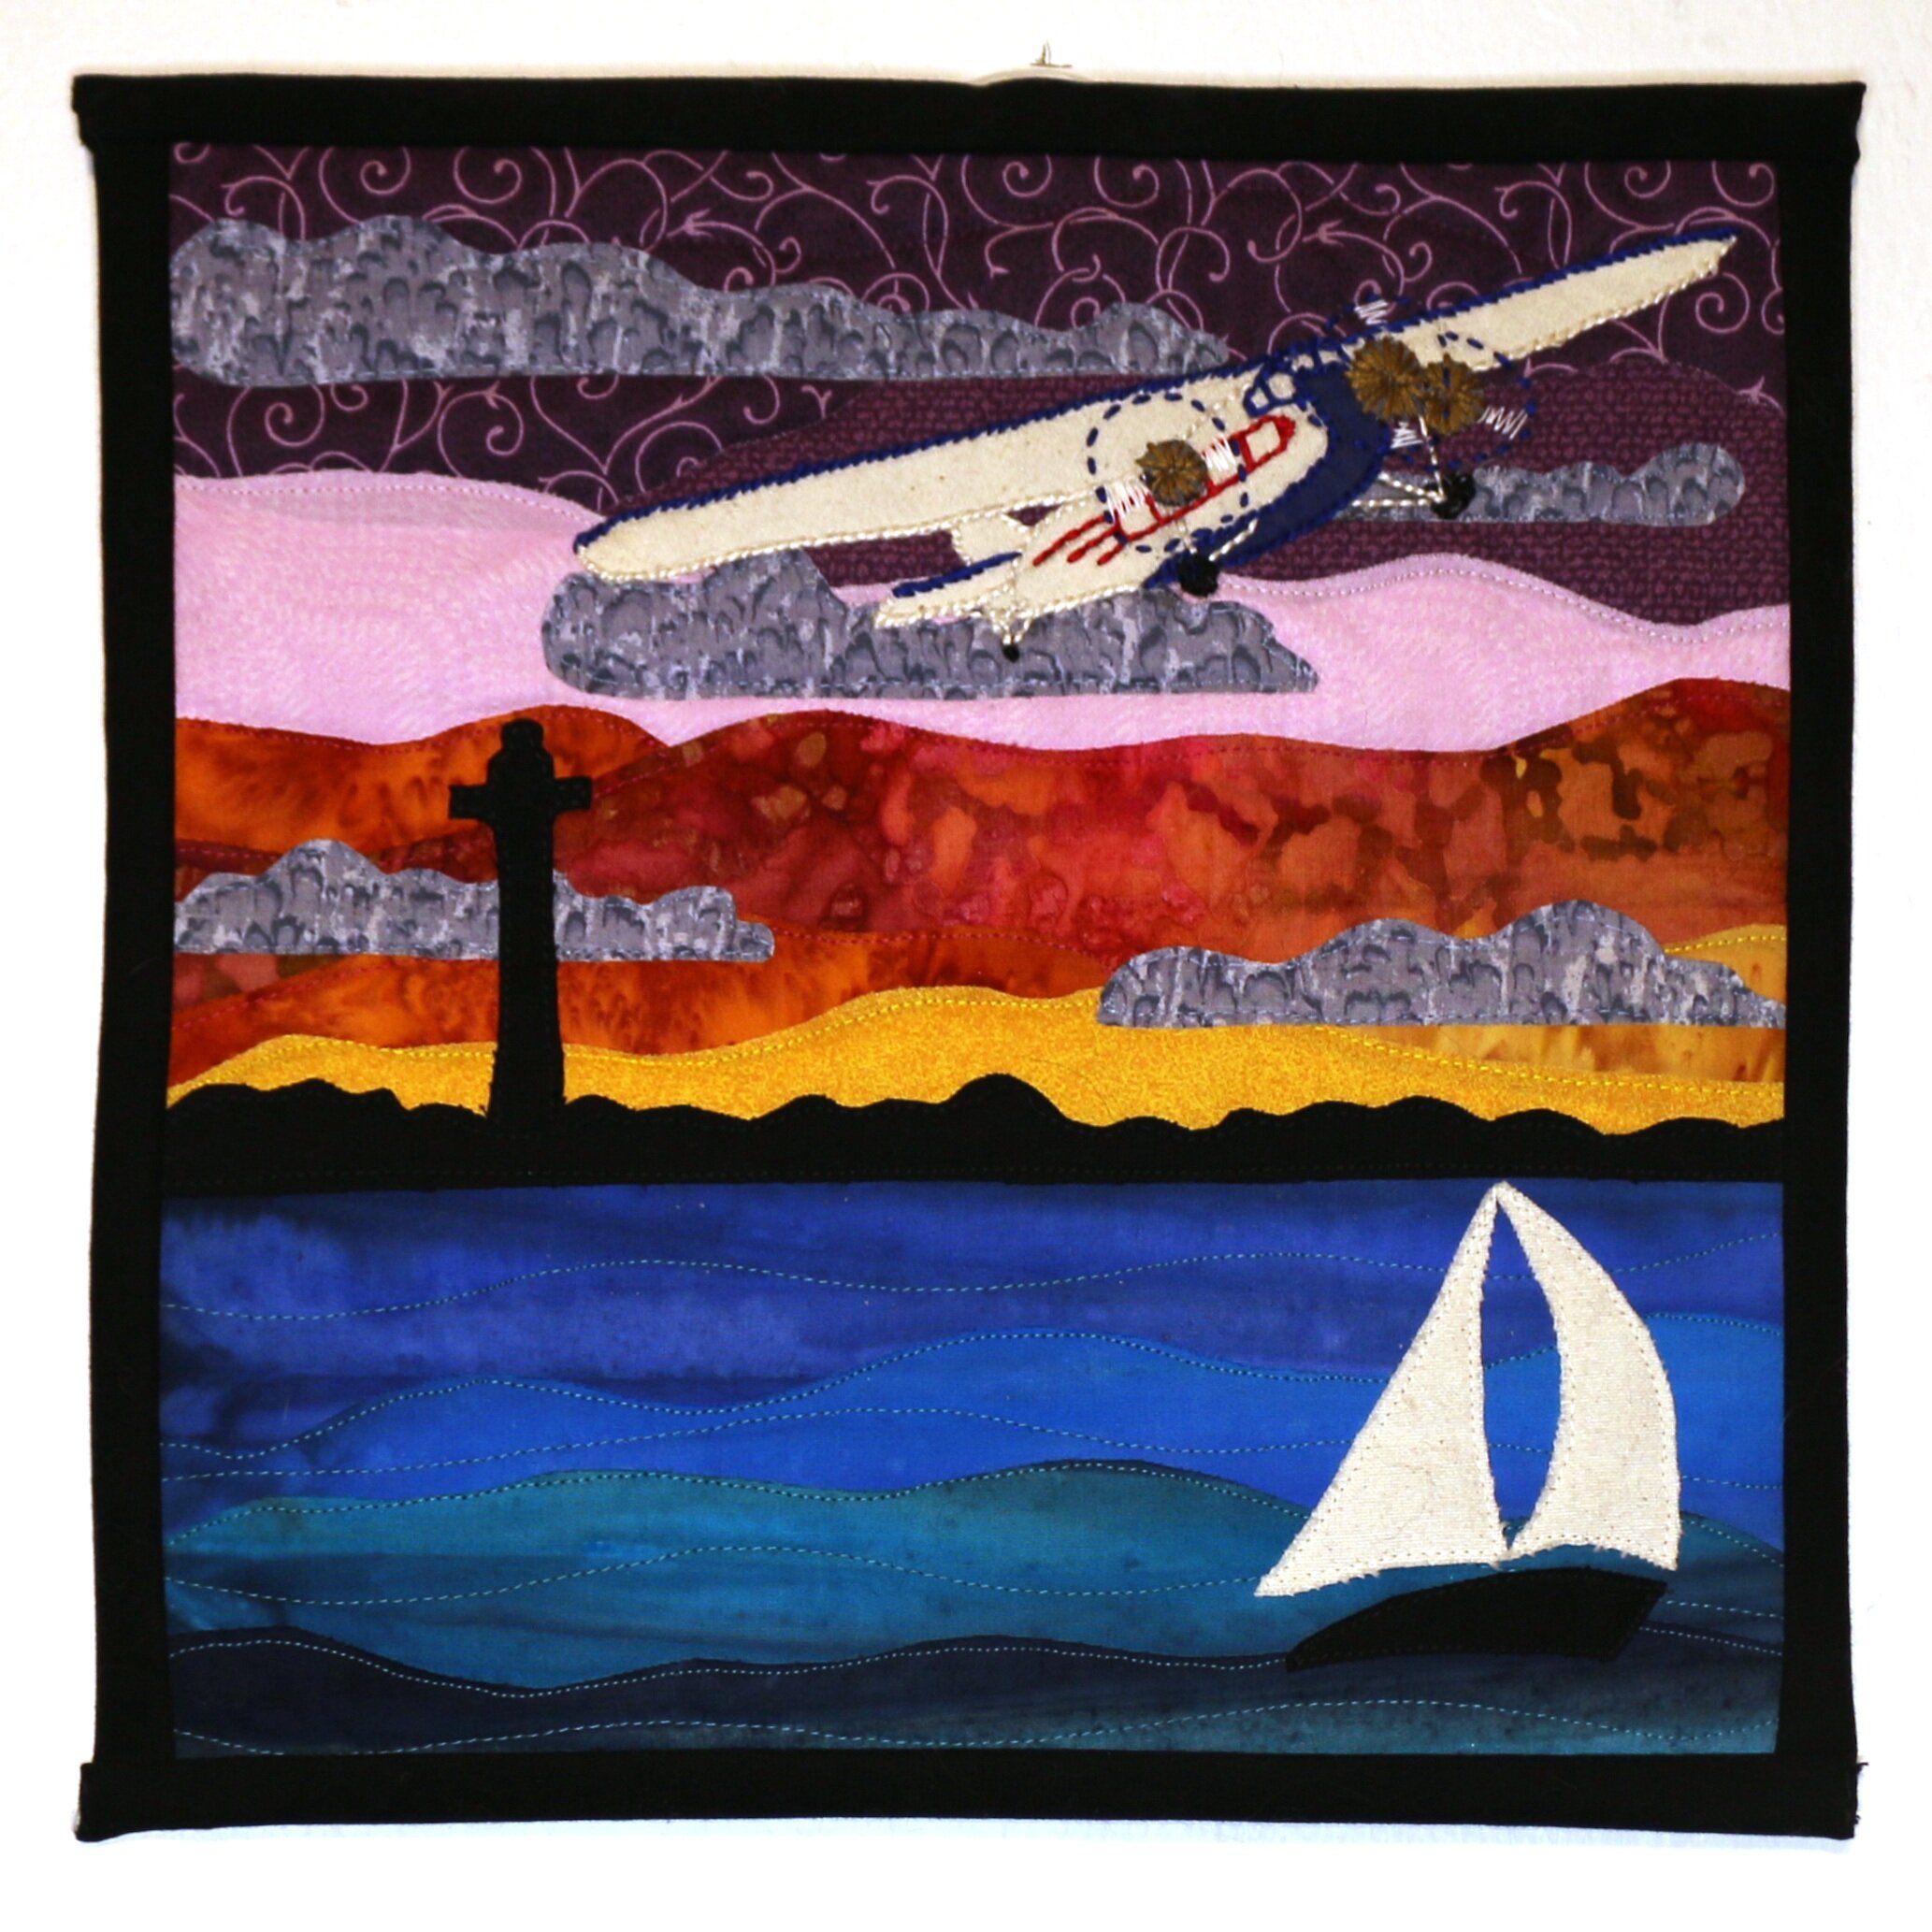  Tin Goose over South Bass Island  Appliqué quilt with hand embroidery, machine sewing 